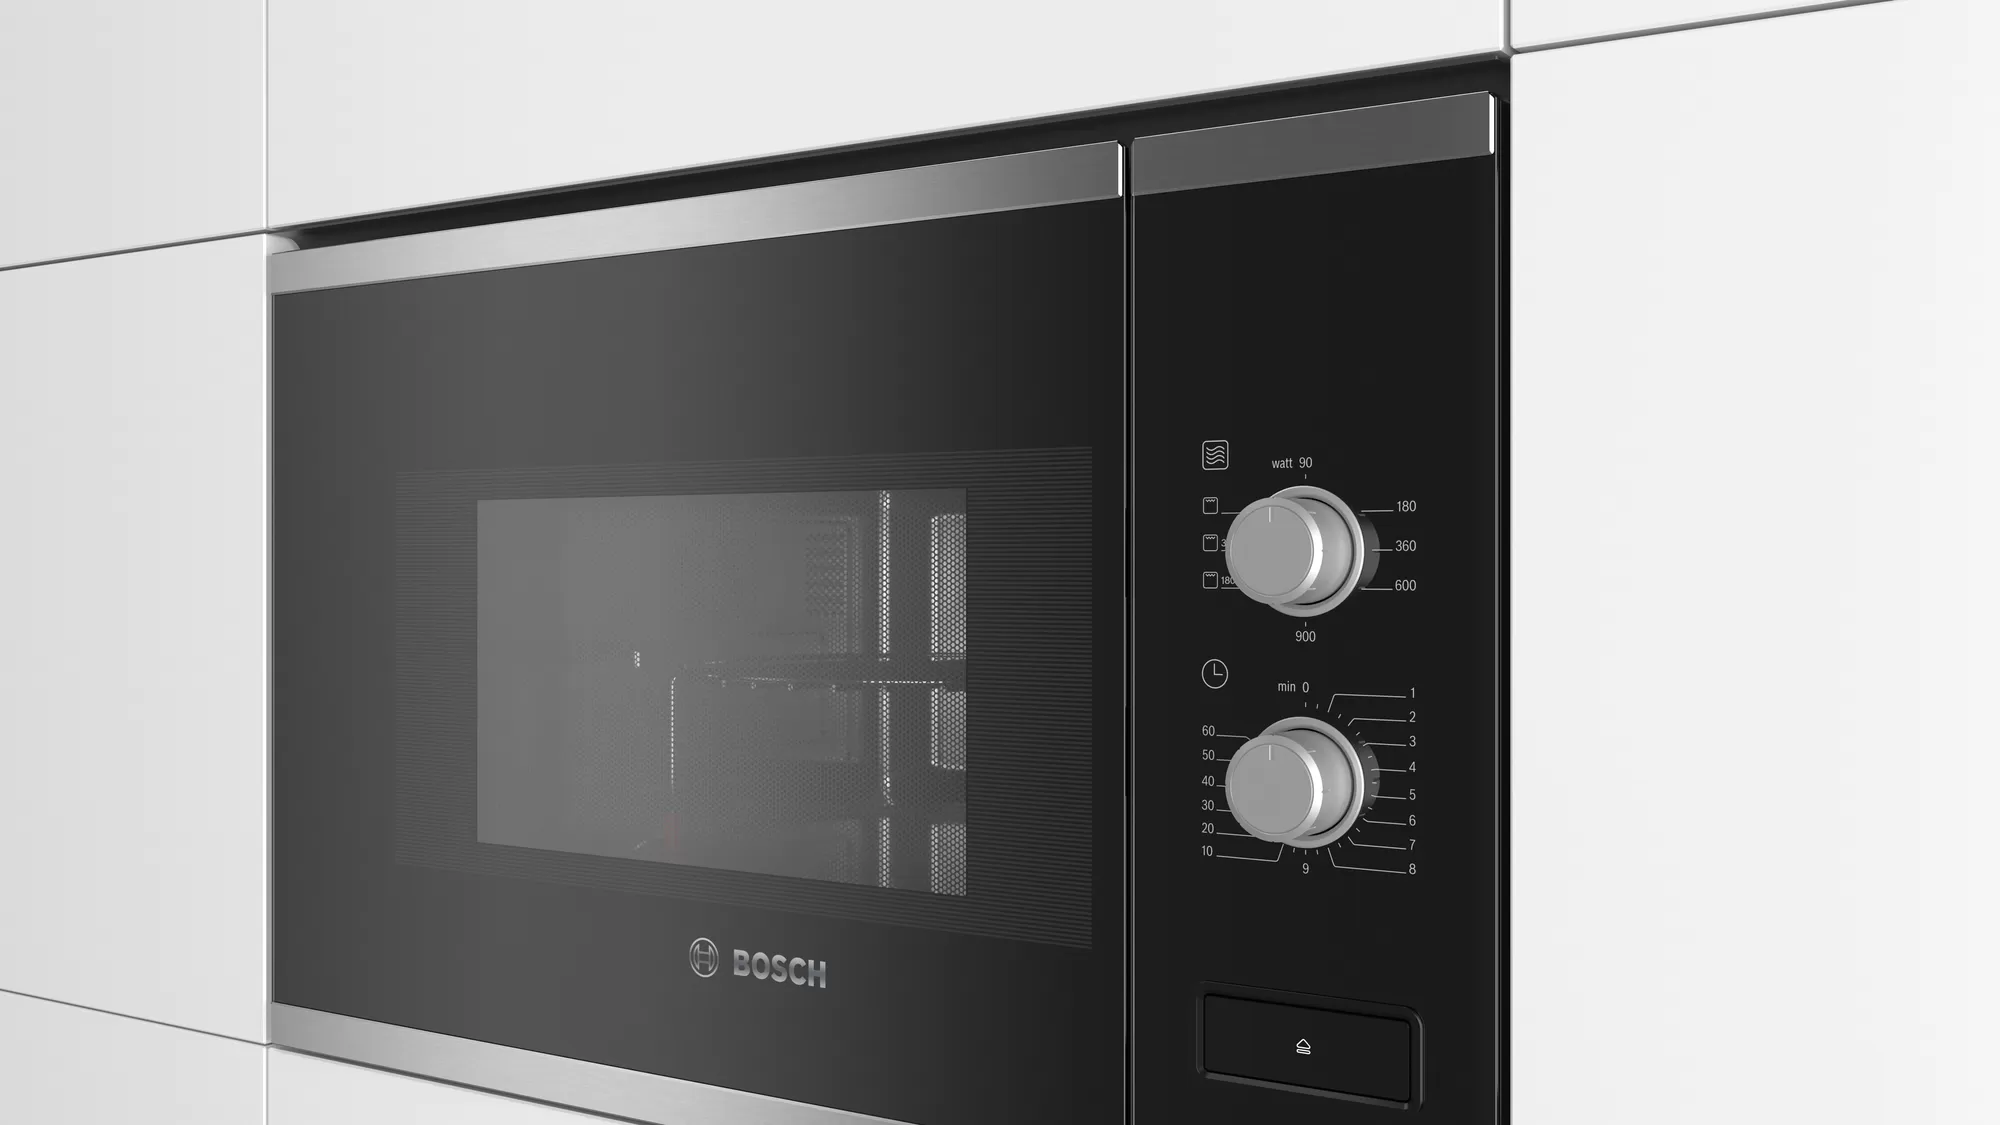 Bosch Series 4 BEL550MS0I Stainless Steel Microwave Oven (Black)